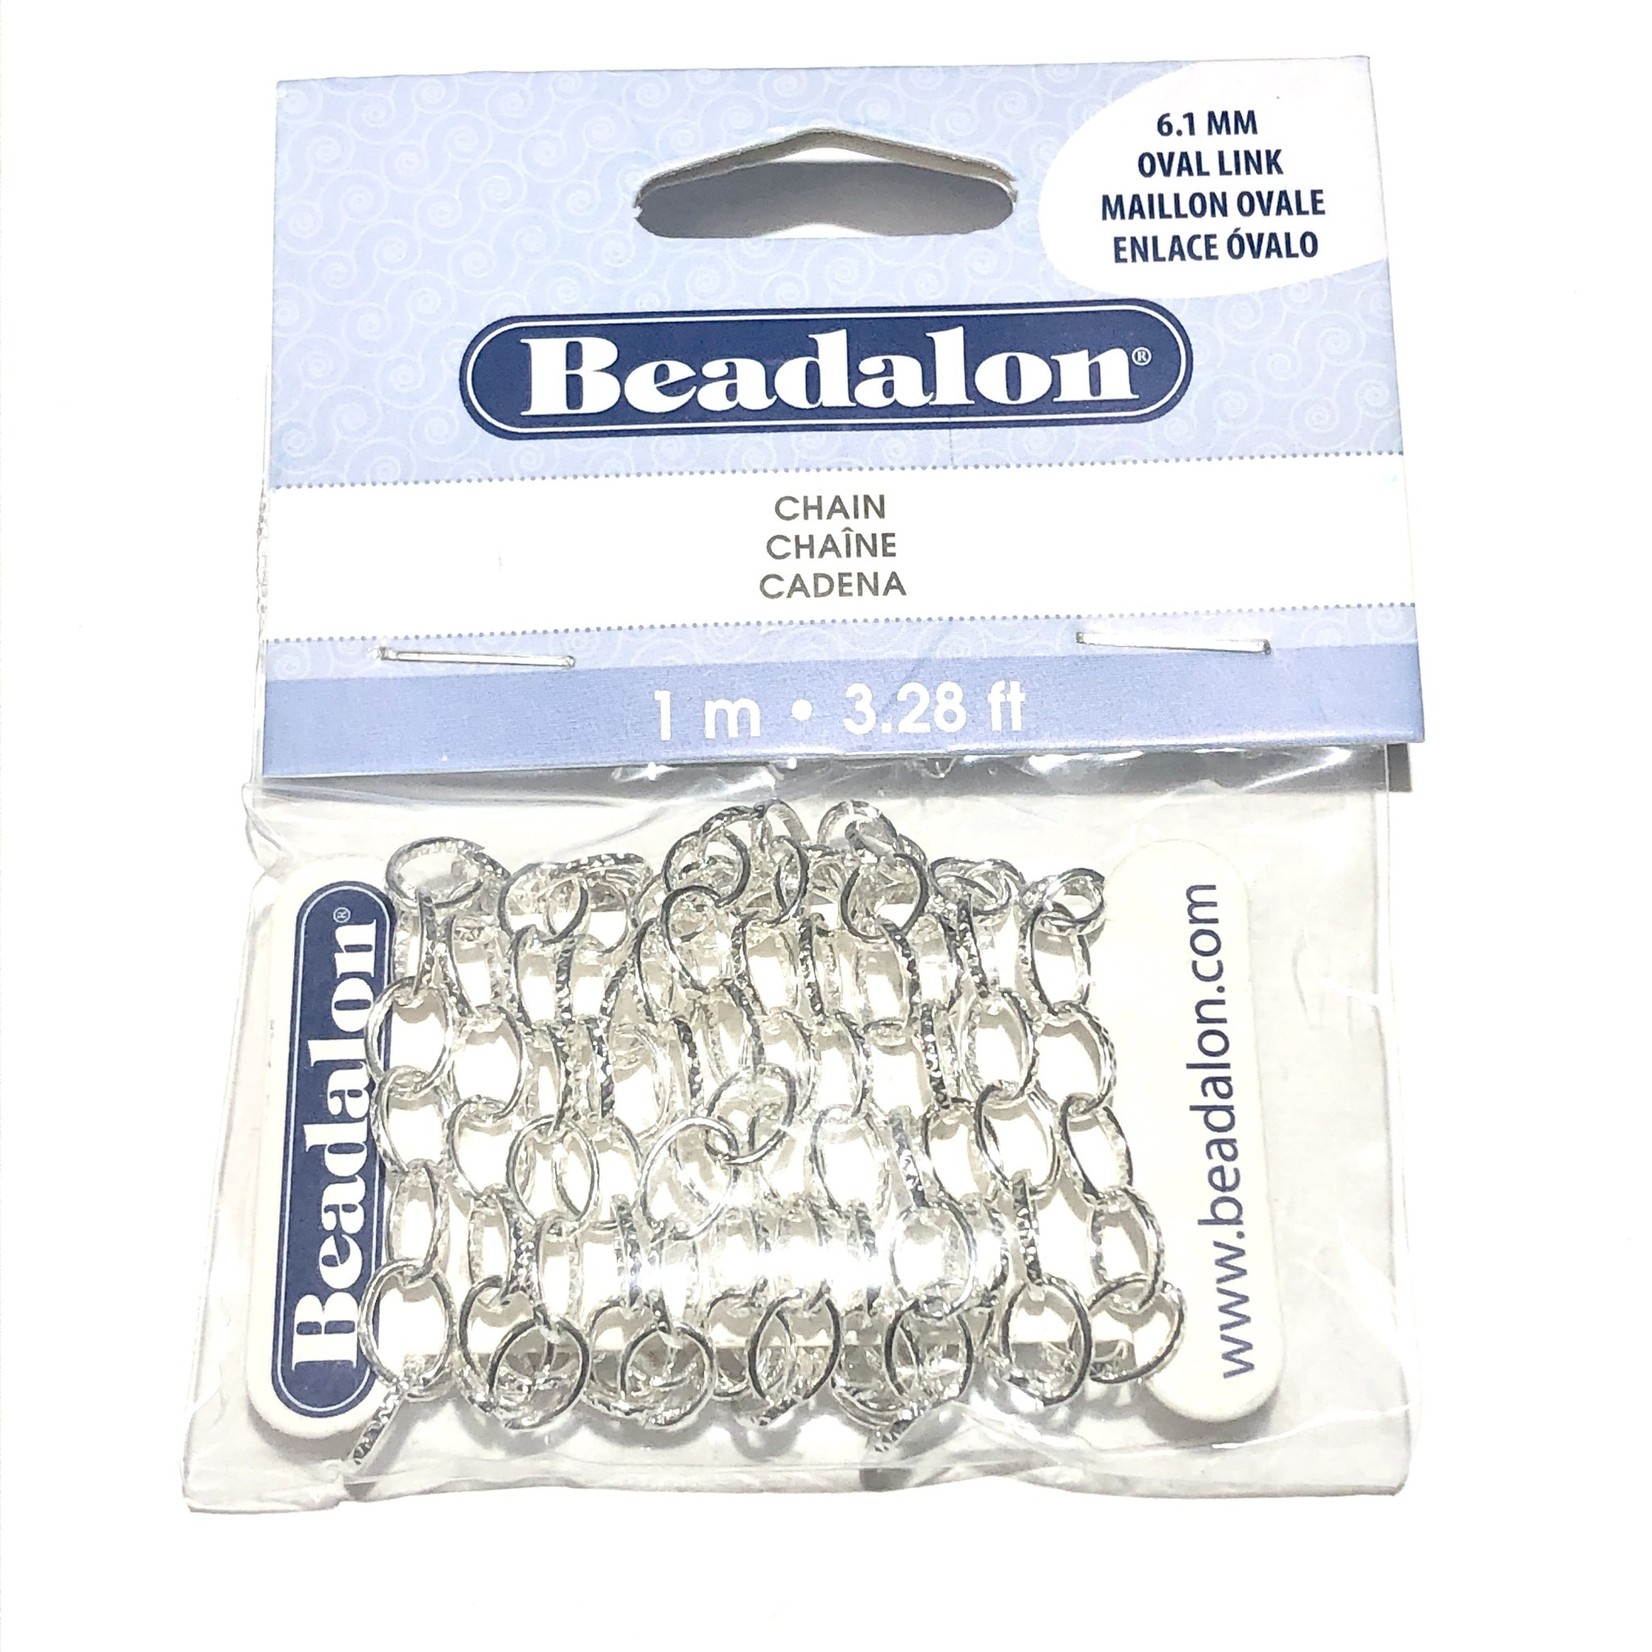 Beadalon Oval Link Chain 6.1mm Silver Plated 1m